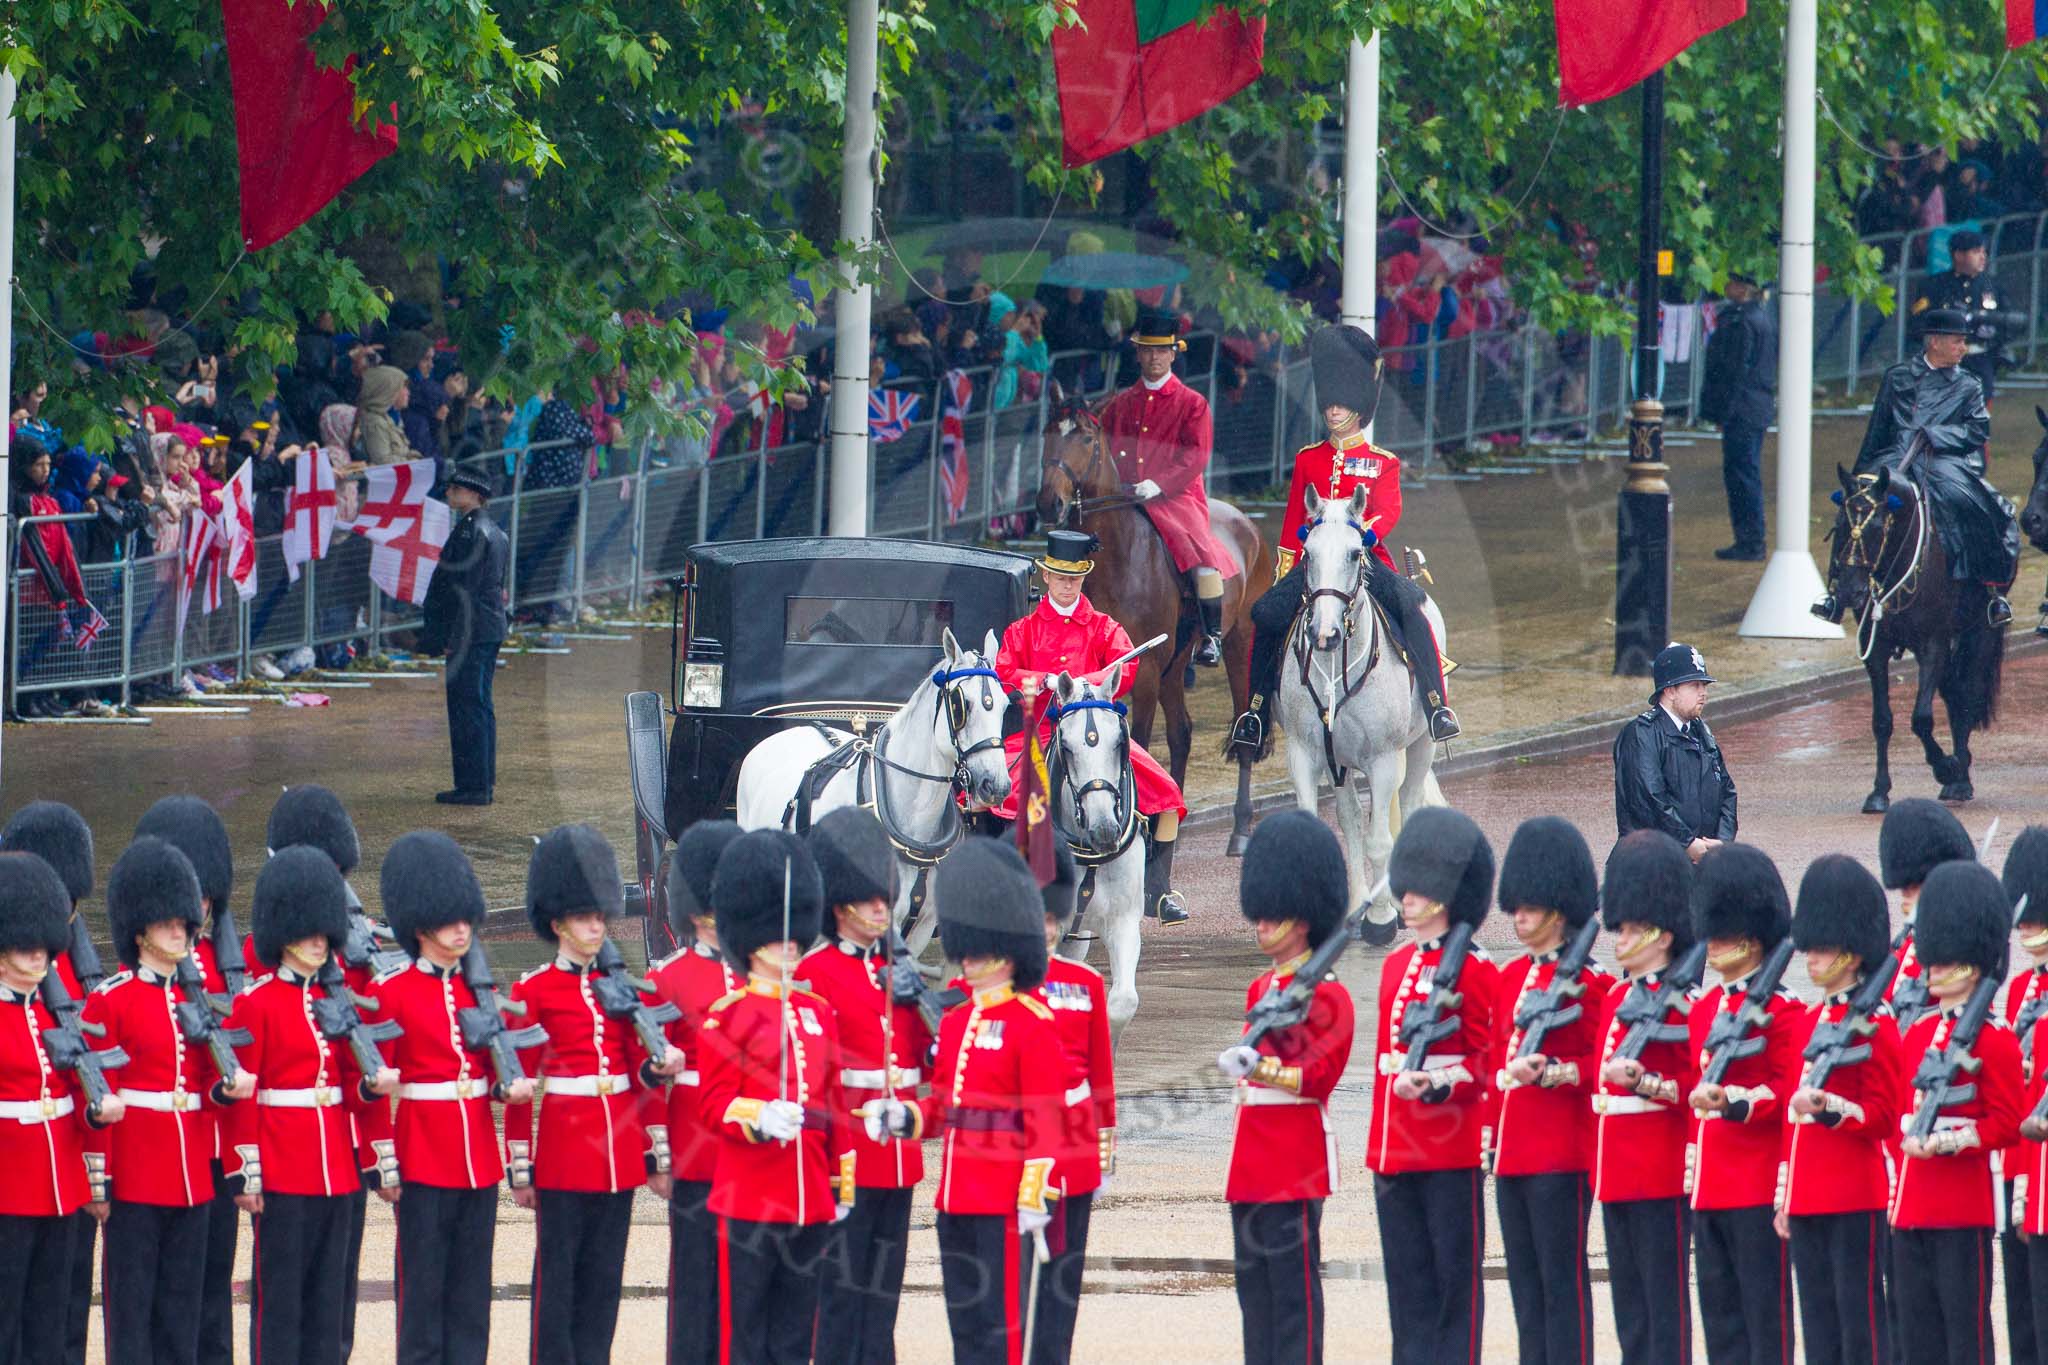 The Colonel's Review 2014.
Horse Guards Parade, Westminster,
London,

United Kingdom,
on 07 June 2014 at 10:57, image #243